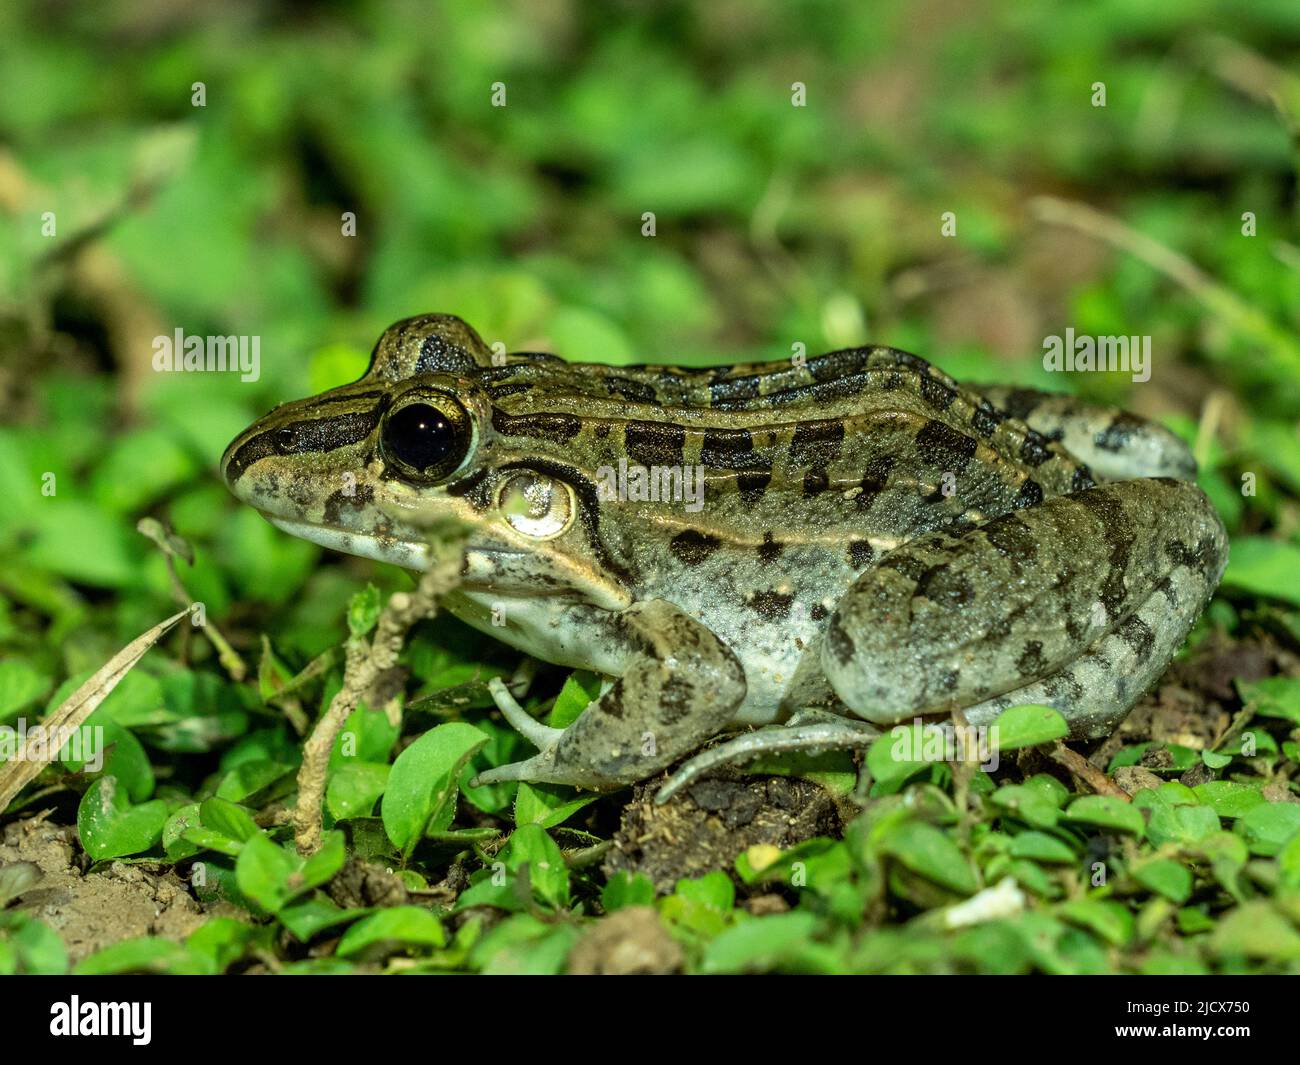 Adult frog from the order Anura, Pouso Allegre, Mato Grosso, Pantanal, Brazil, South America Stock Photo